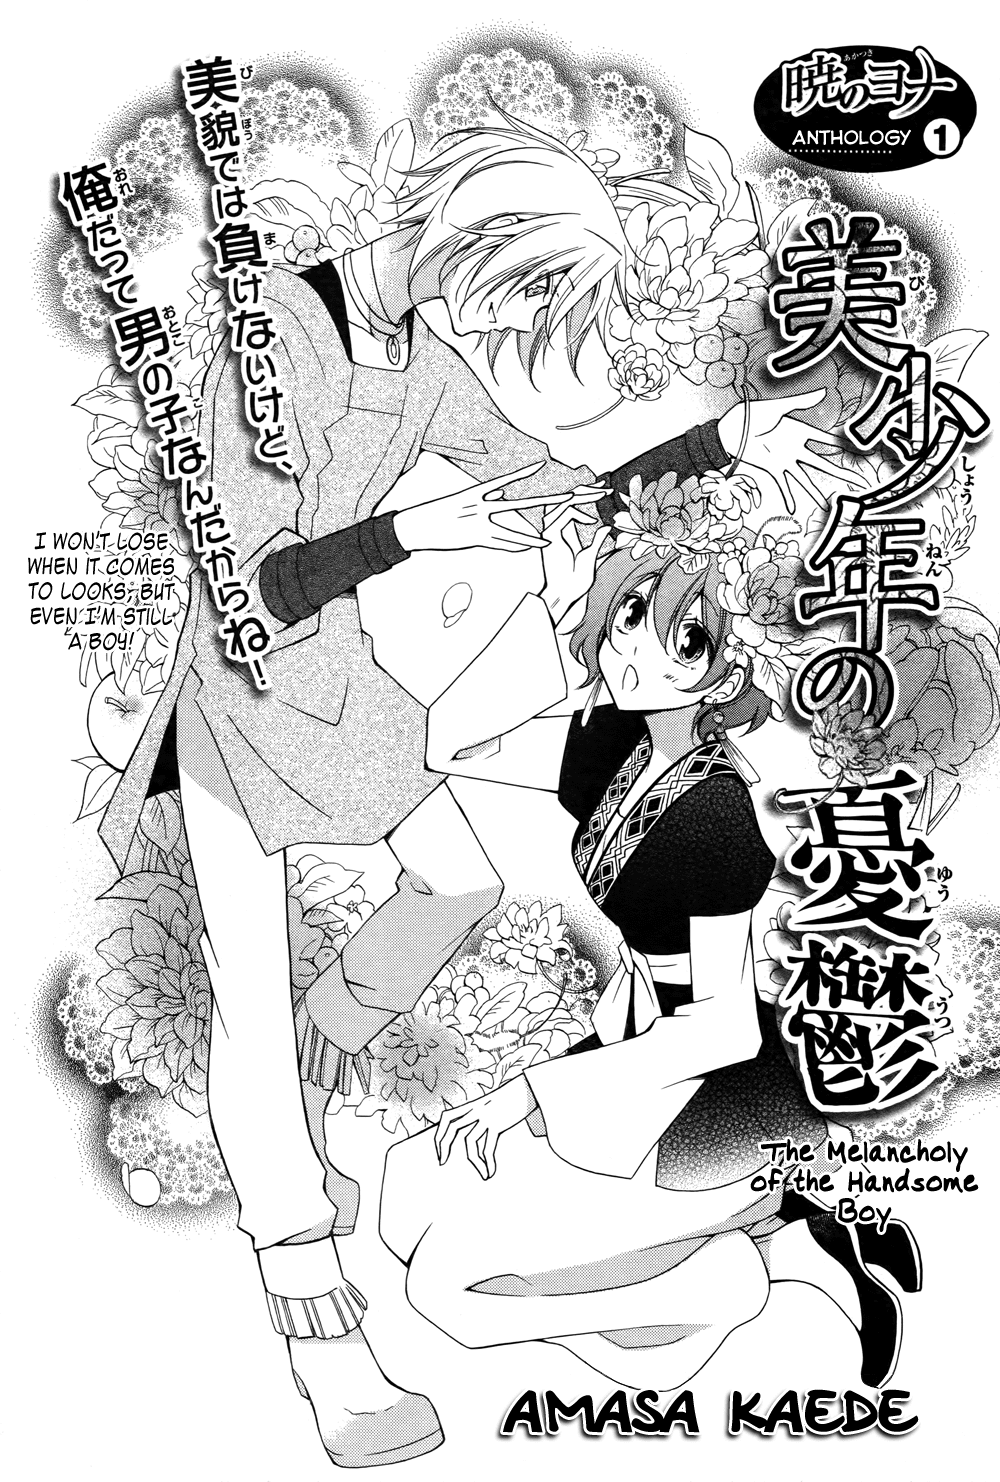 Akatsuki No Yona Chapter 70.6: The Melancholy Of The Handsome Boy - Picture 3